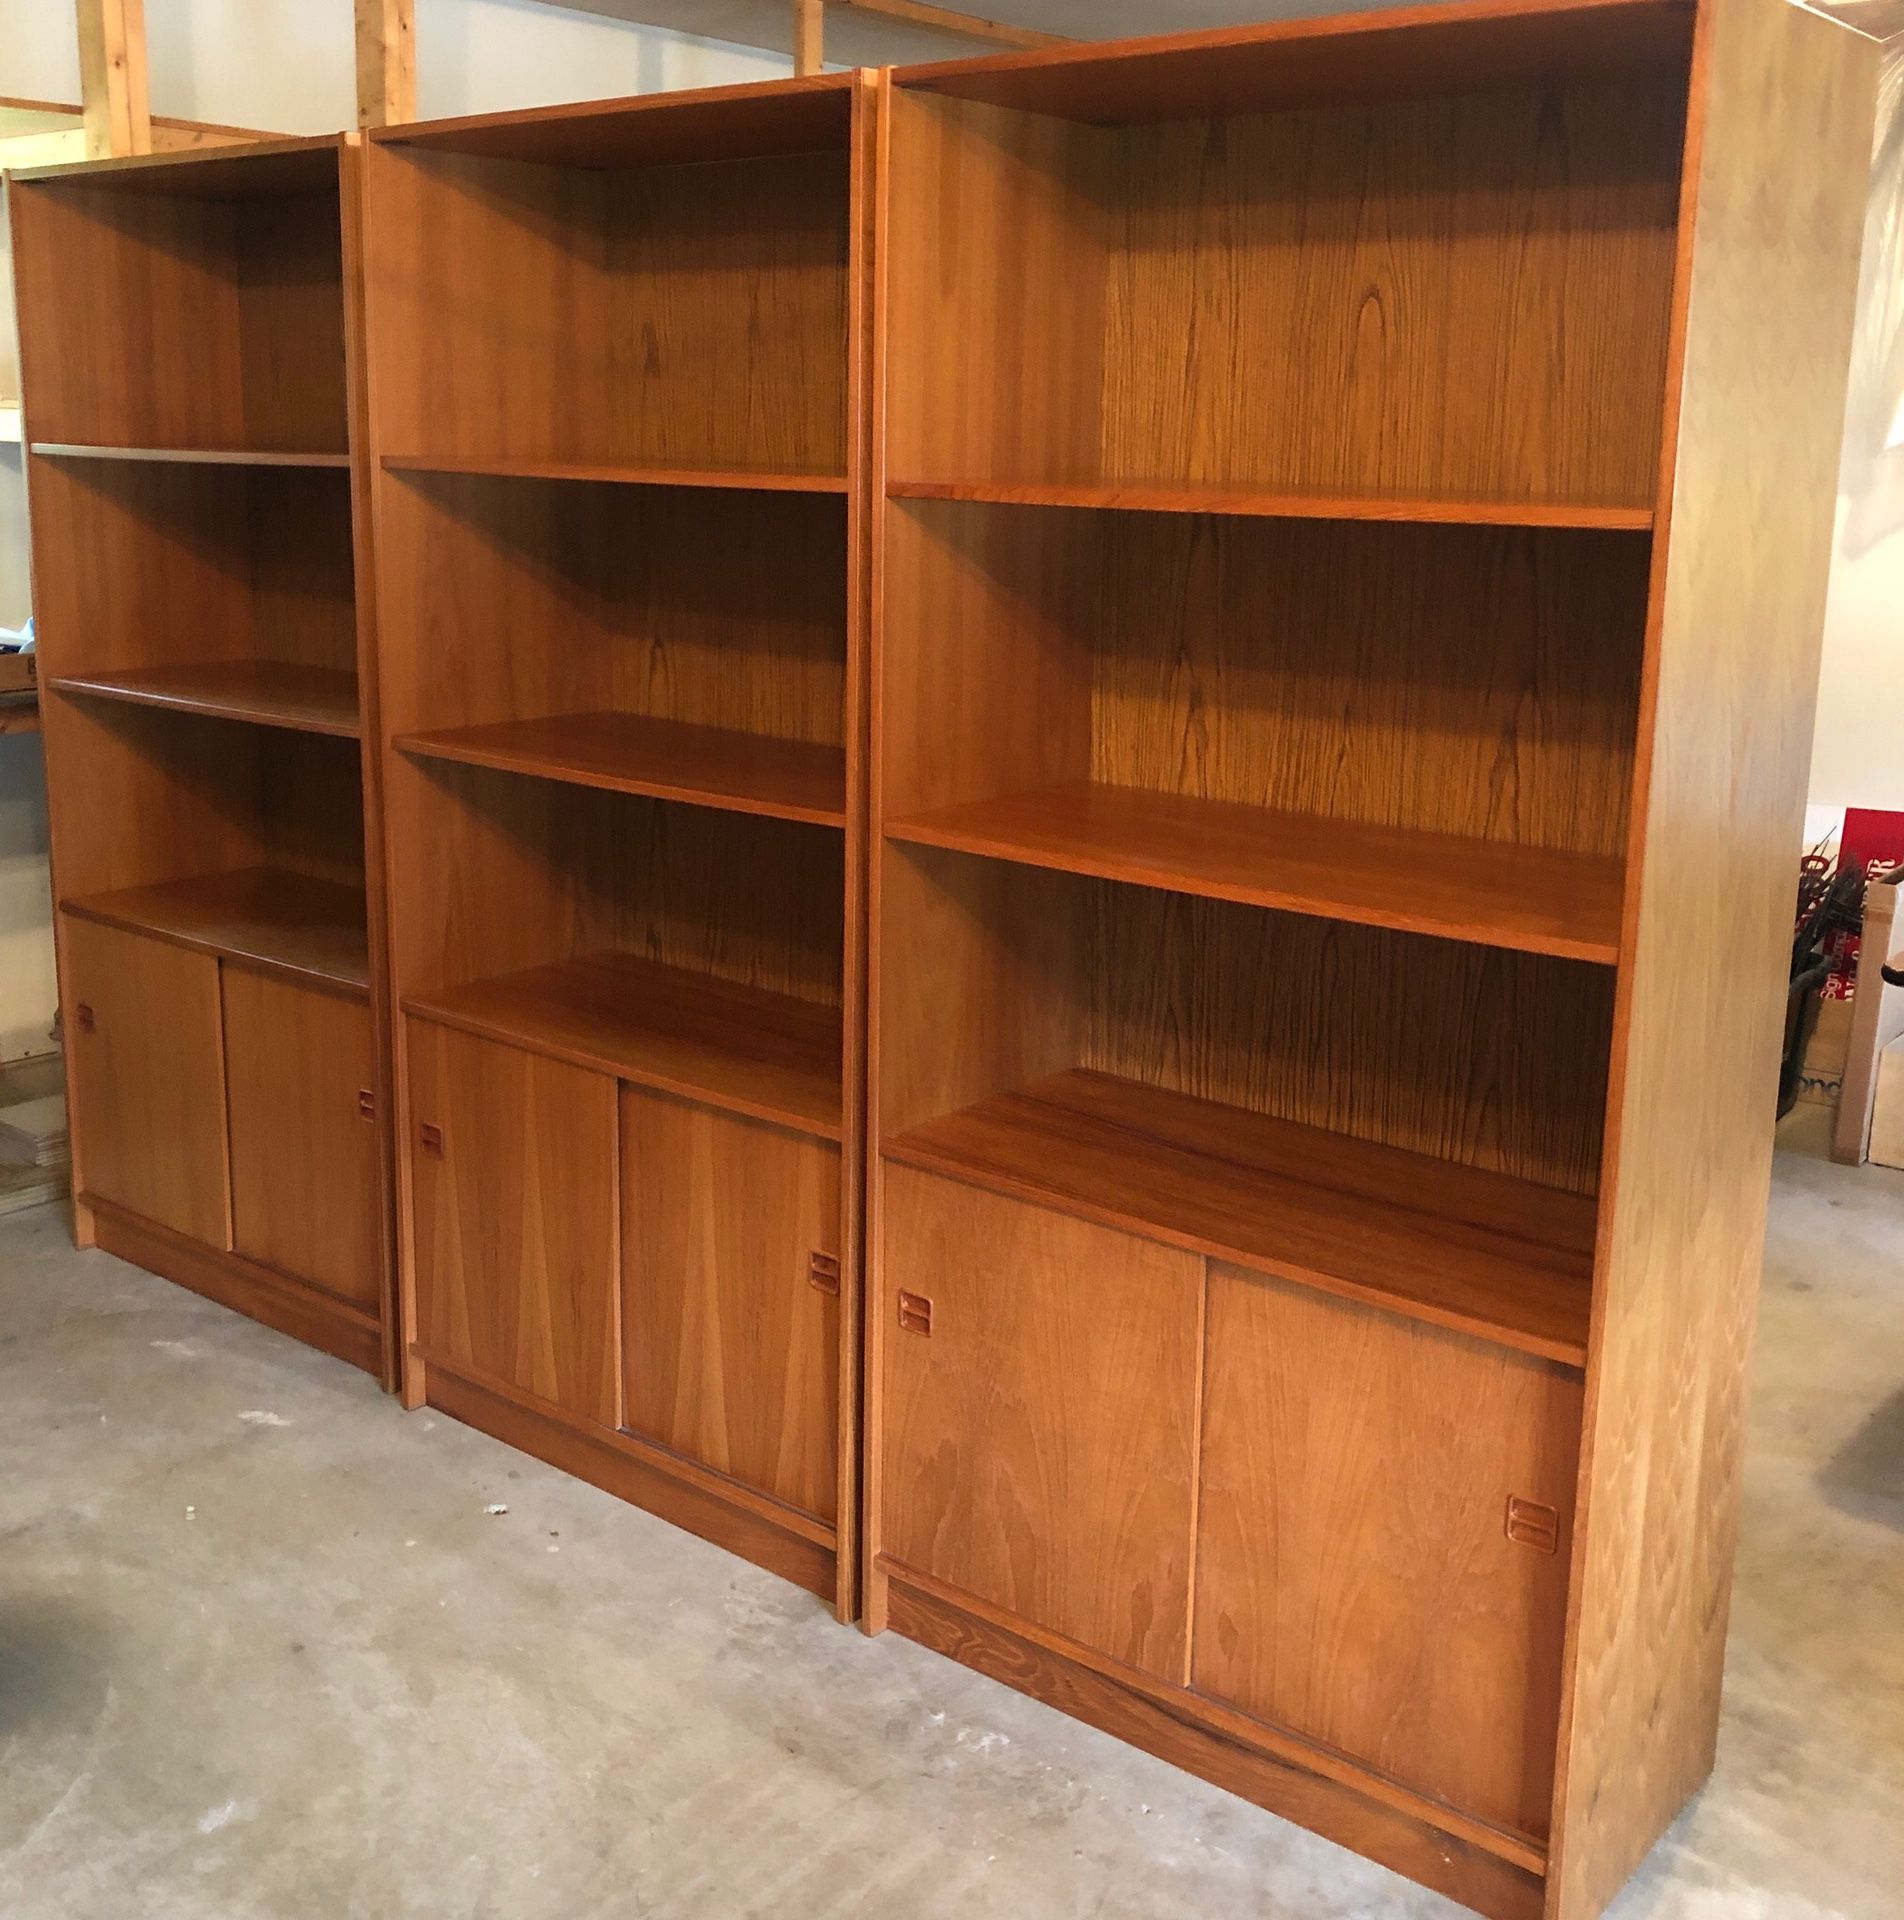 Teak bookcases (each one is $165)